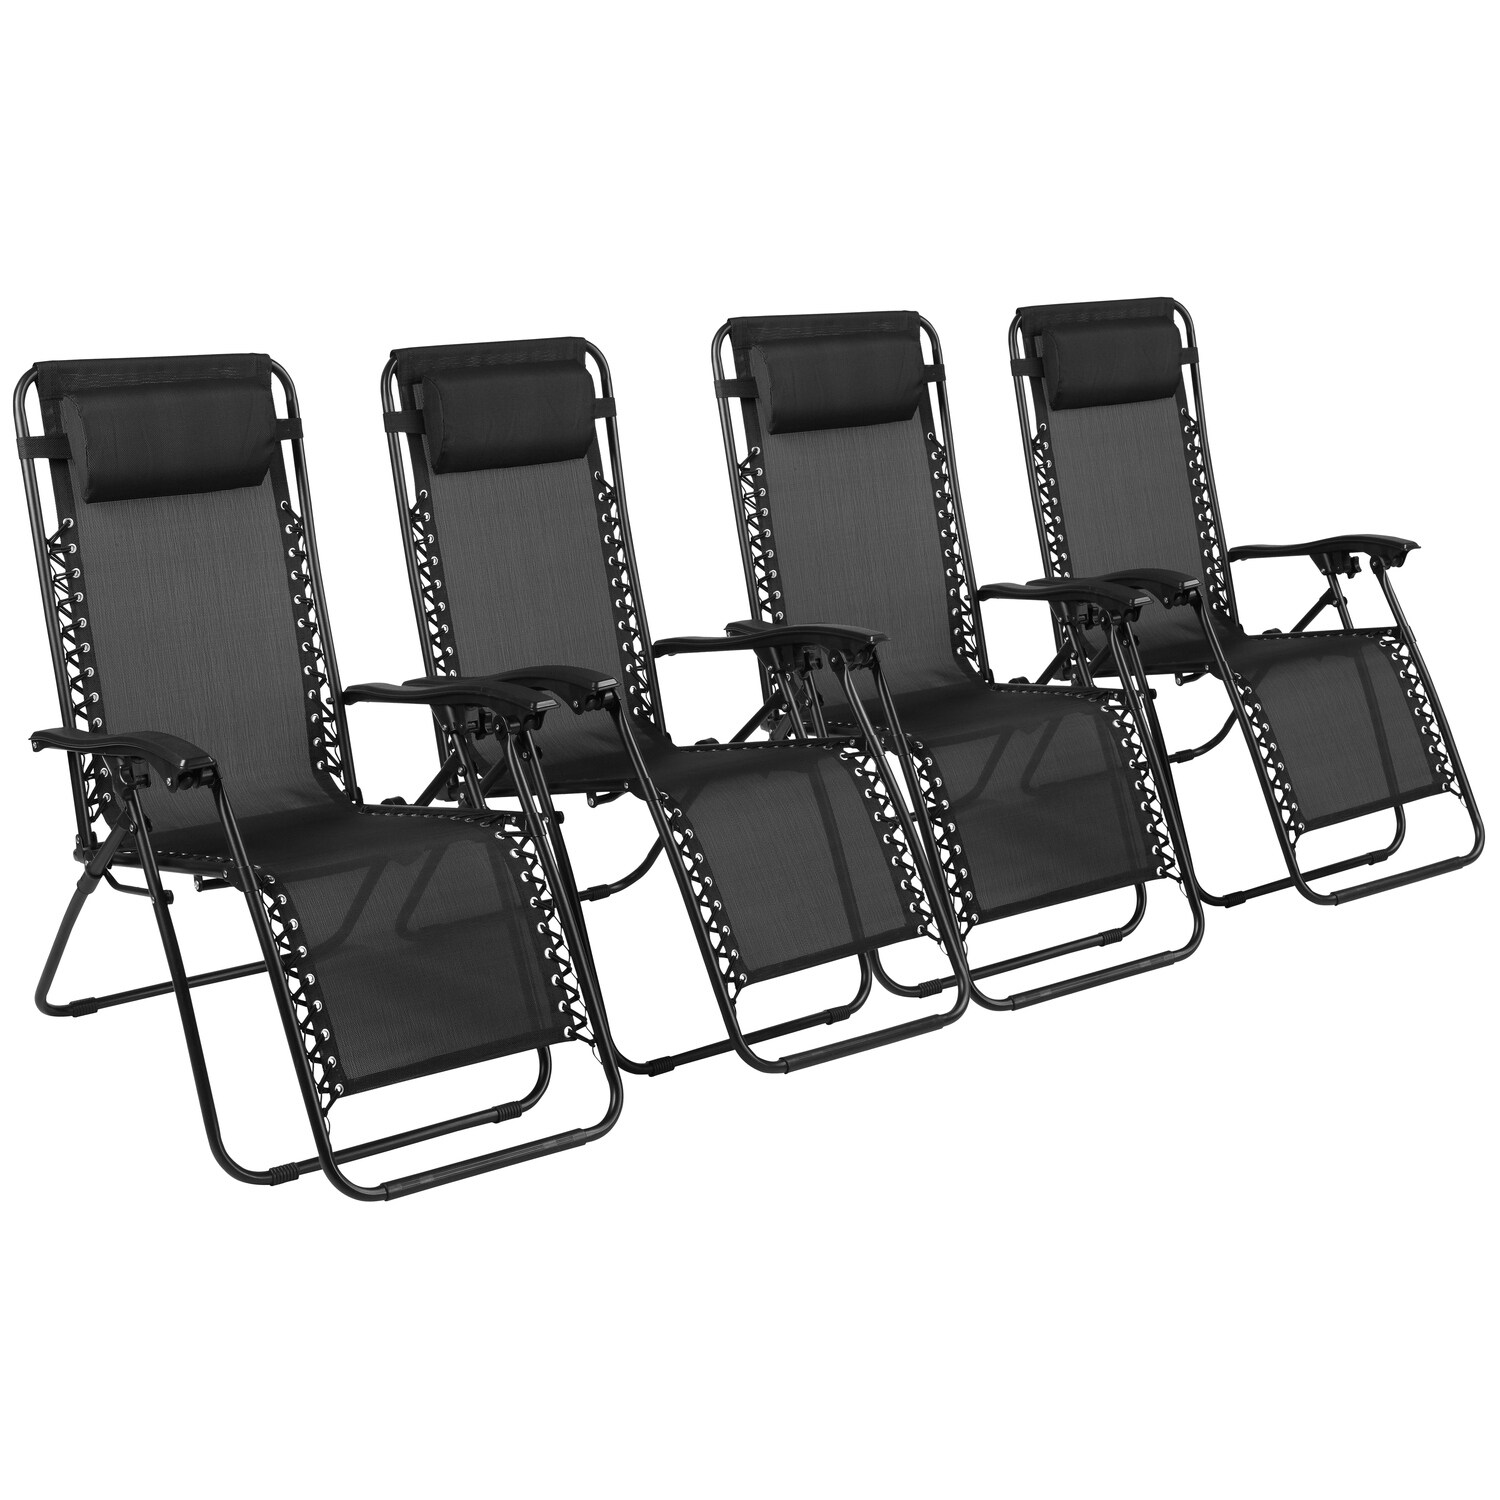 Zero Gravity Chairs Set of 4 Pool Lounge Chair Zero Gravity Recliner Zero Gravity Lounge Chair Antigravity Chairs with Headrest Grey - image 5 of 6